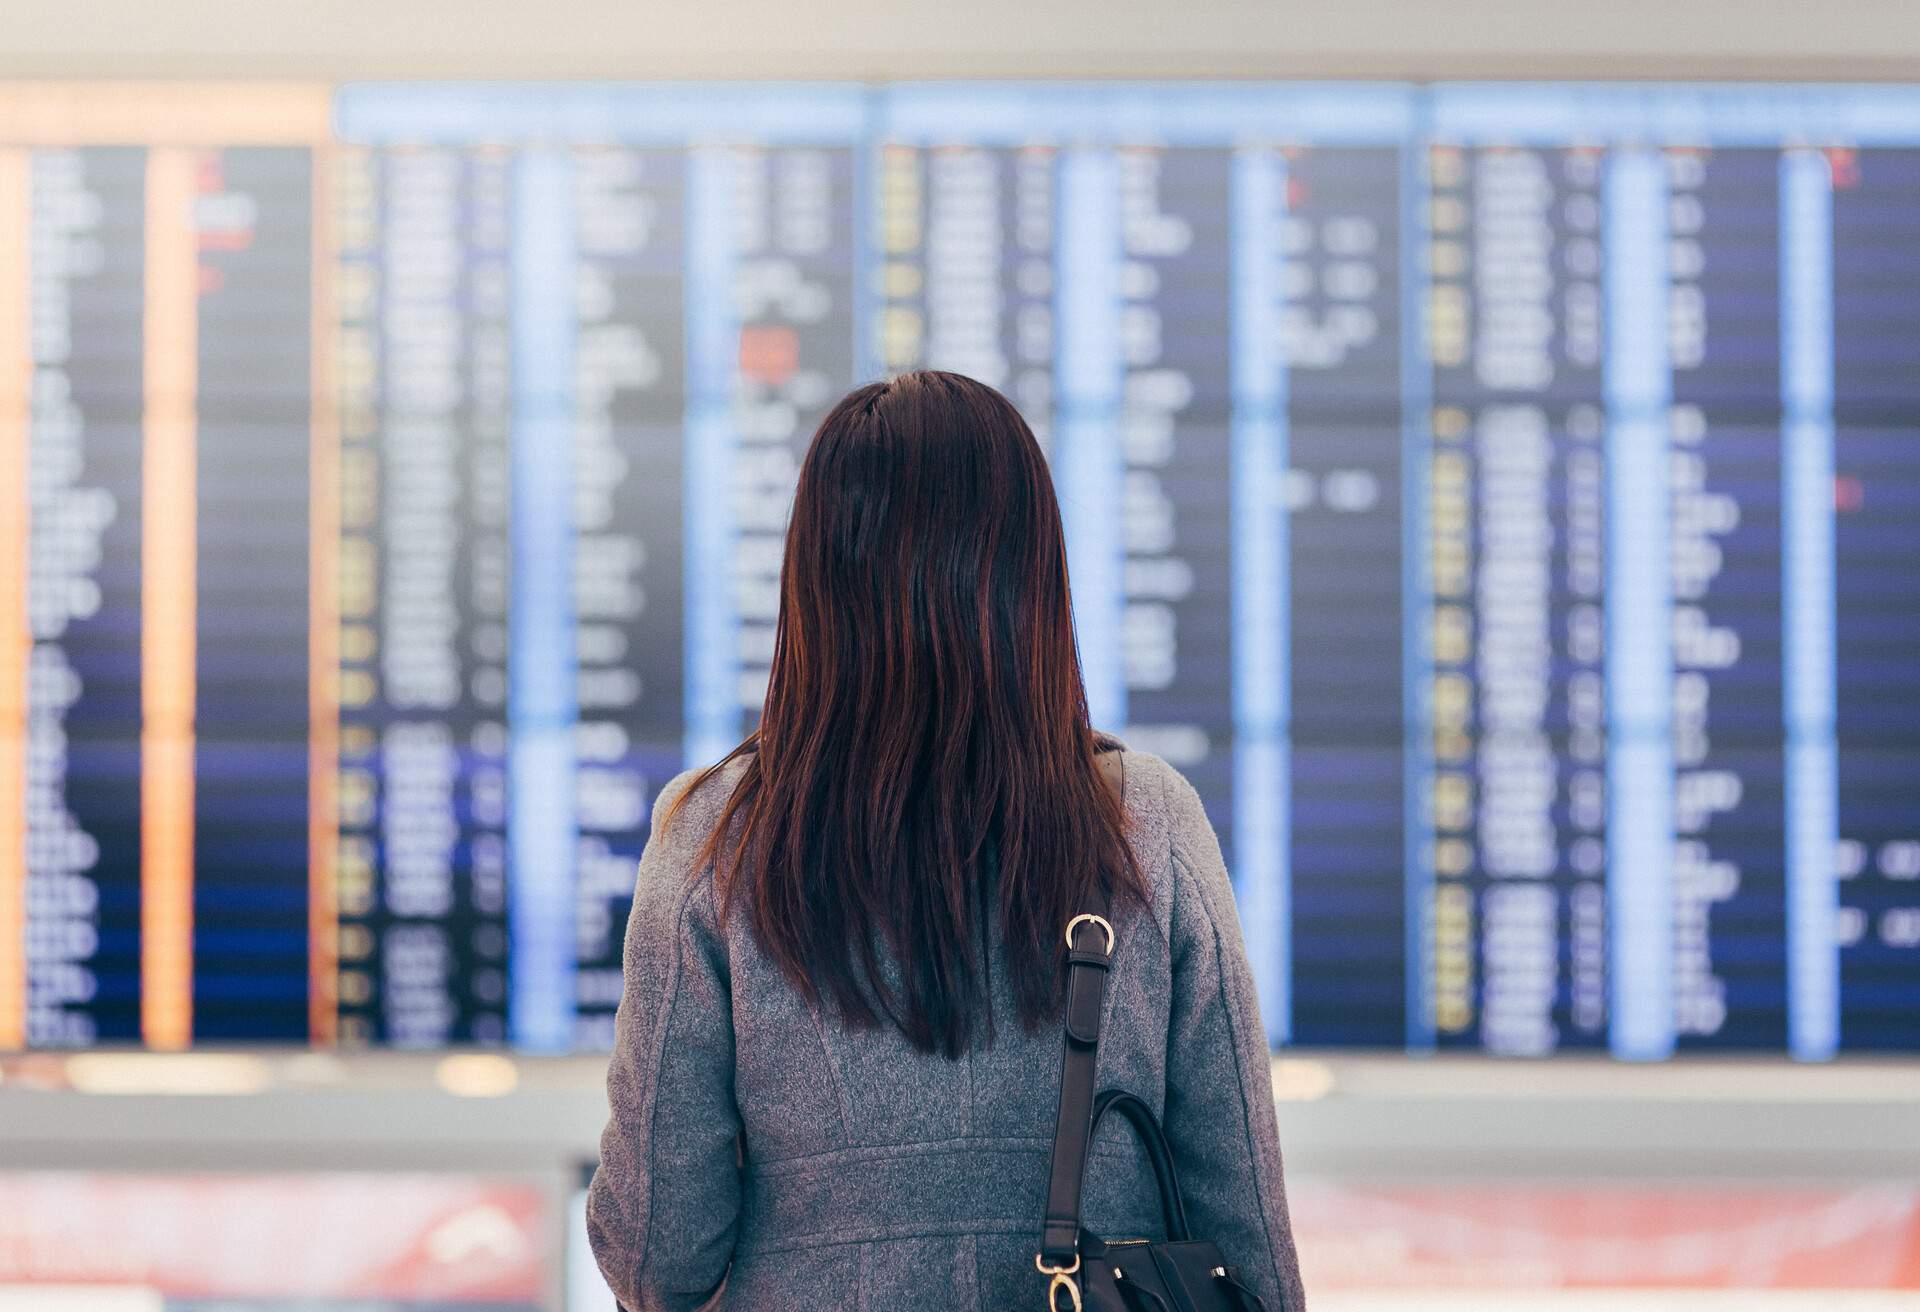 A woman is standing in an airport terminal, looking up at the Arrival Departure Board.